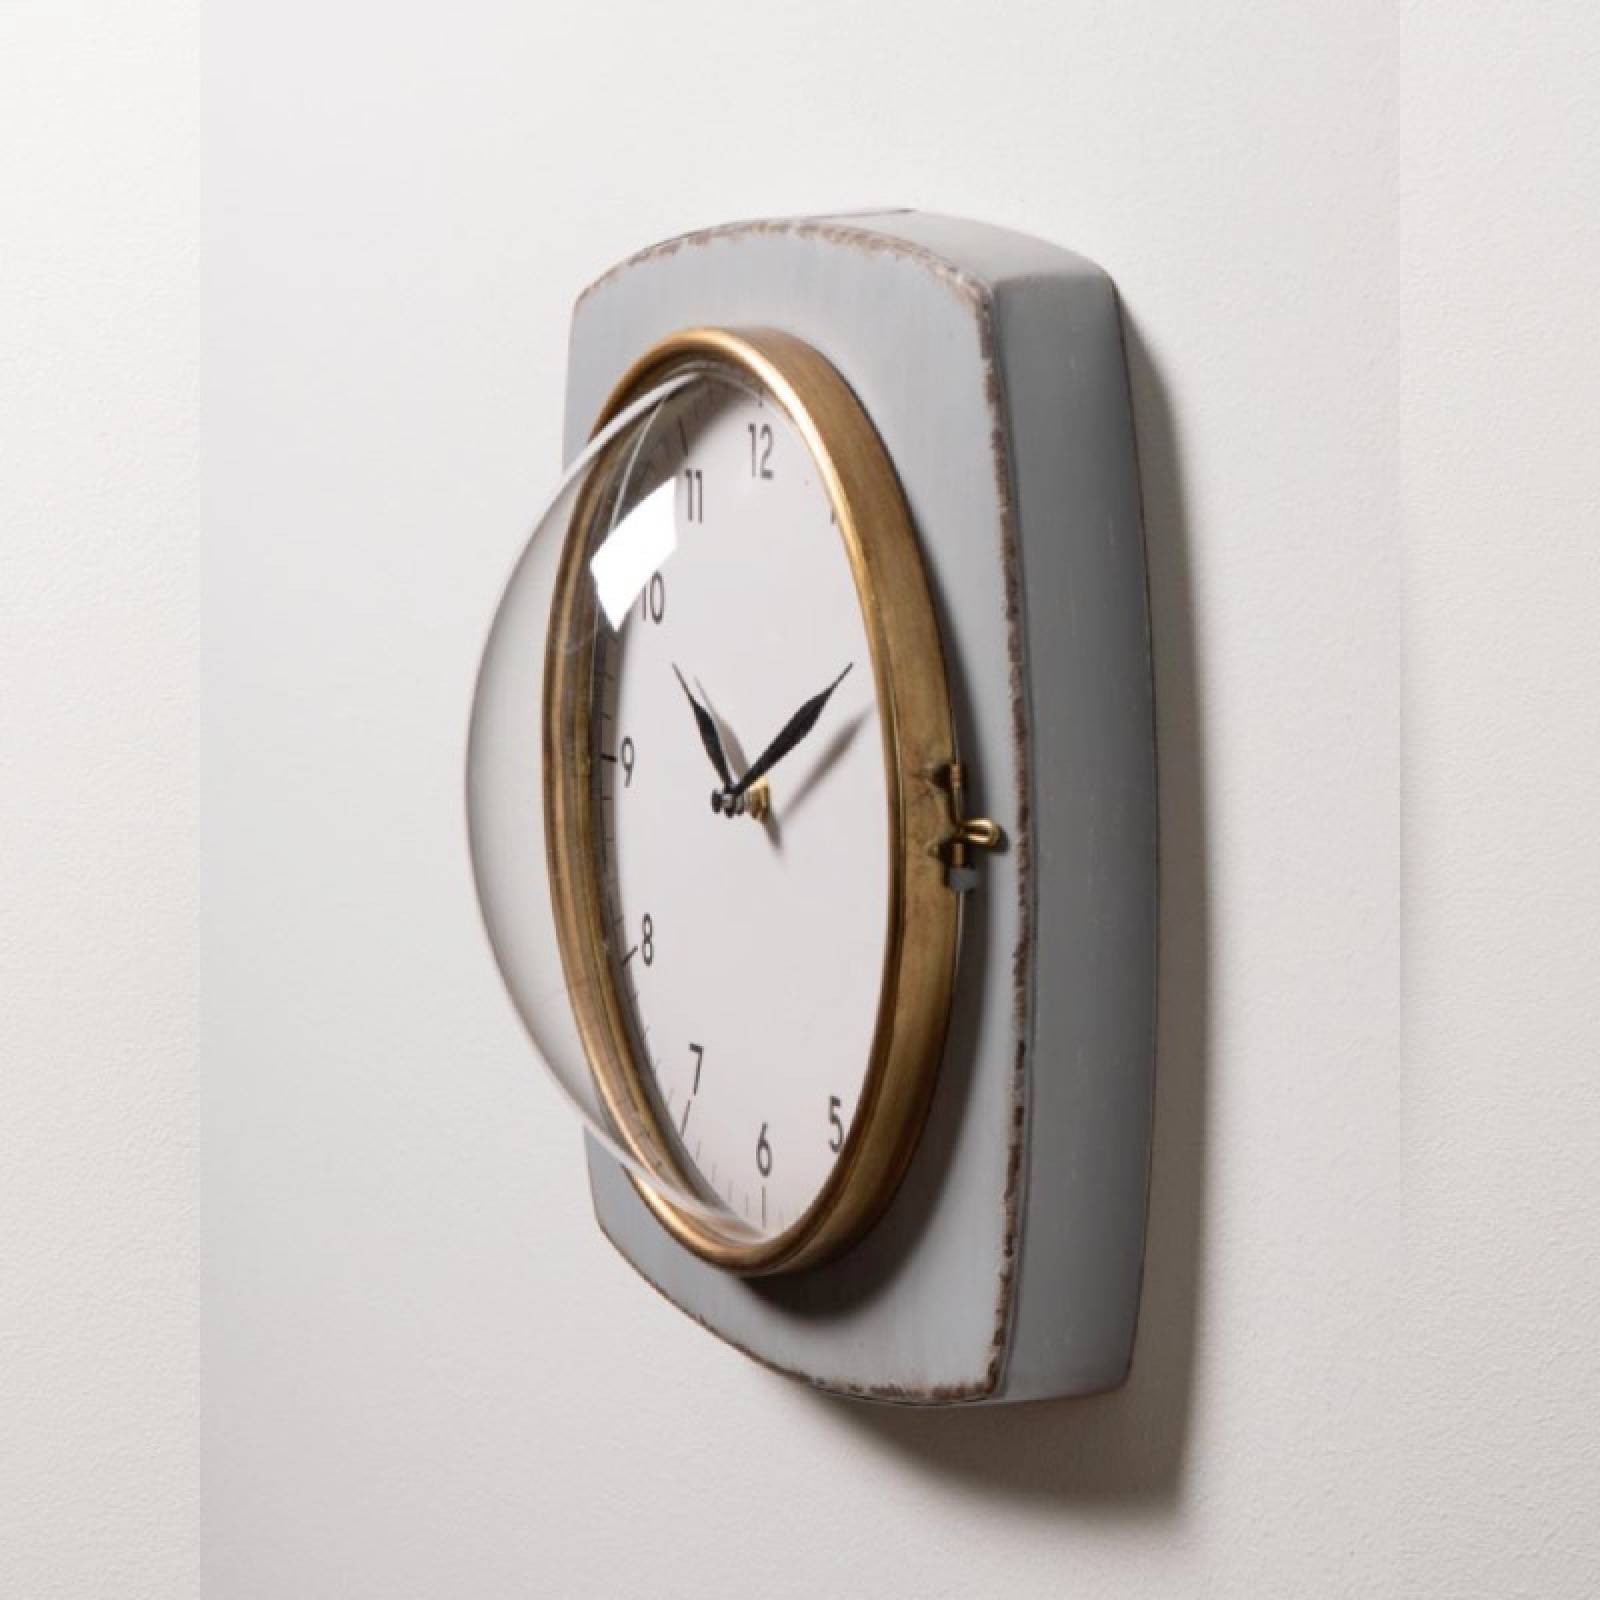 Distressed Grey Wall Clock With Convex Front thumbnails